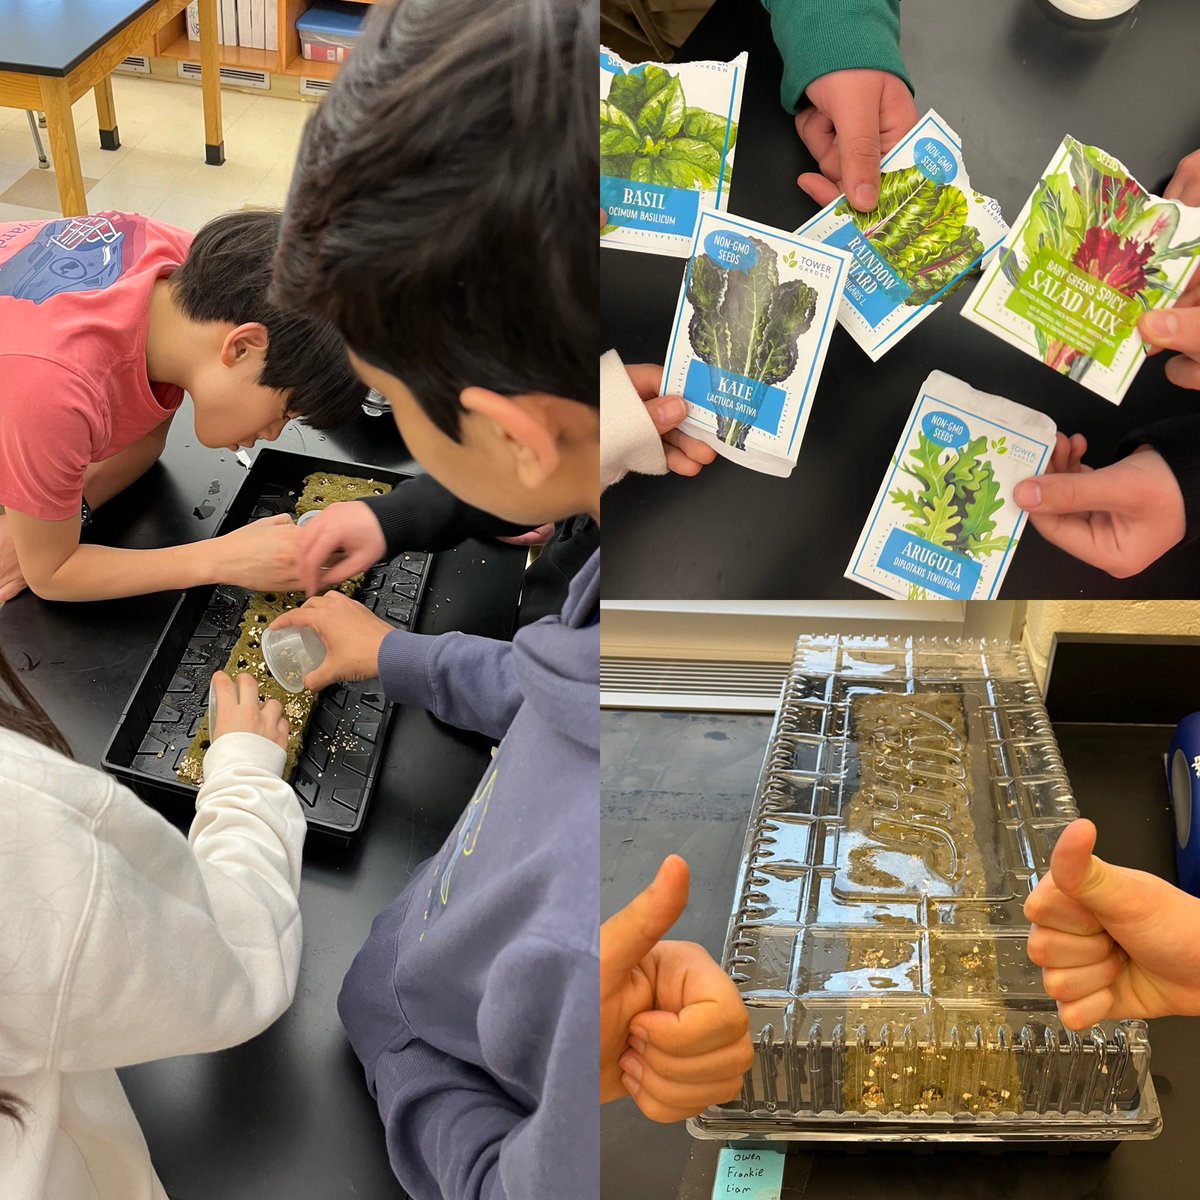 @WPSEisenhower Environmental Club prepares rockwool cubes with seeds to germinate for our vertical garden. Students can’t wait to have a ready supply of kale and chard for afternoon snack!